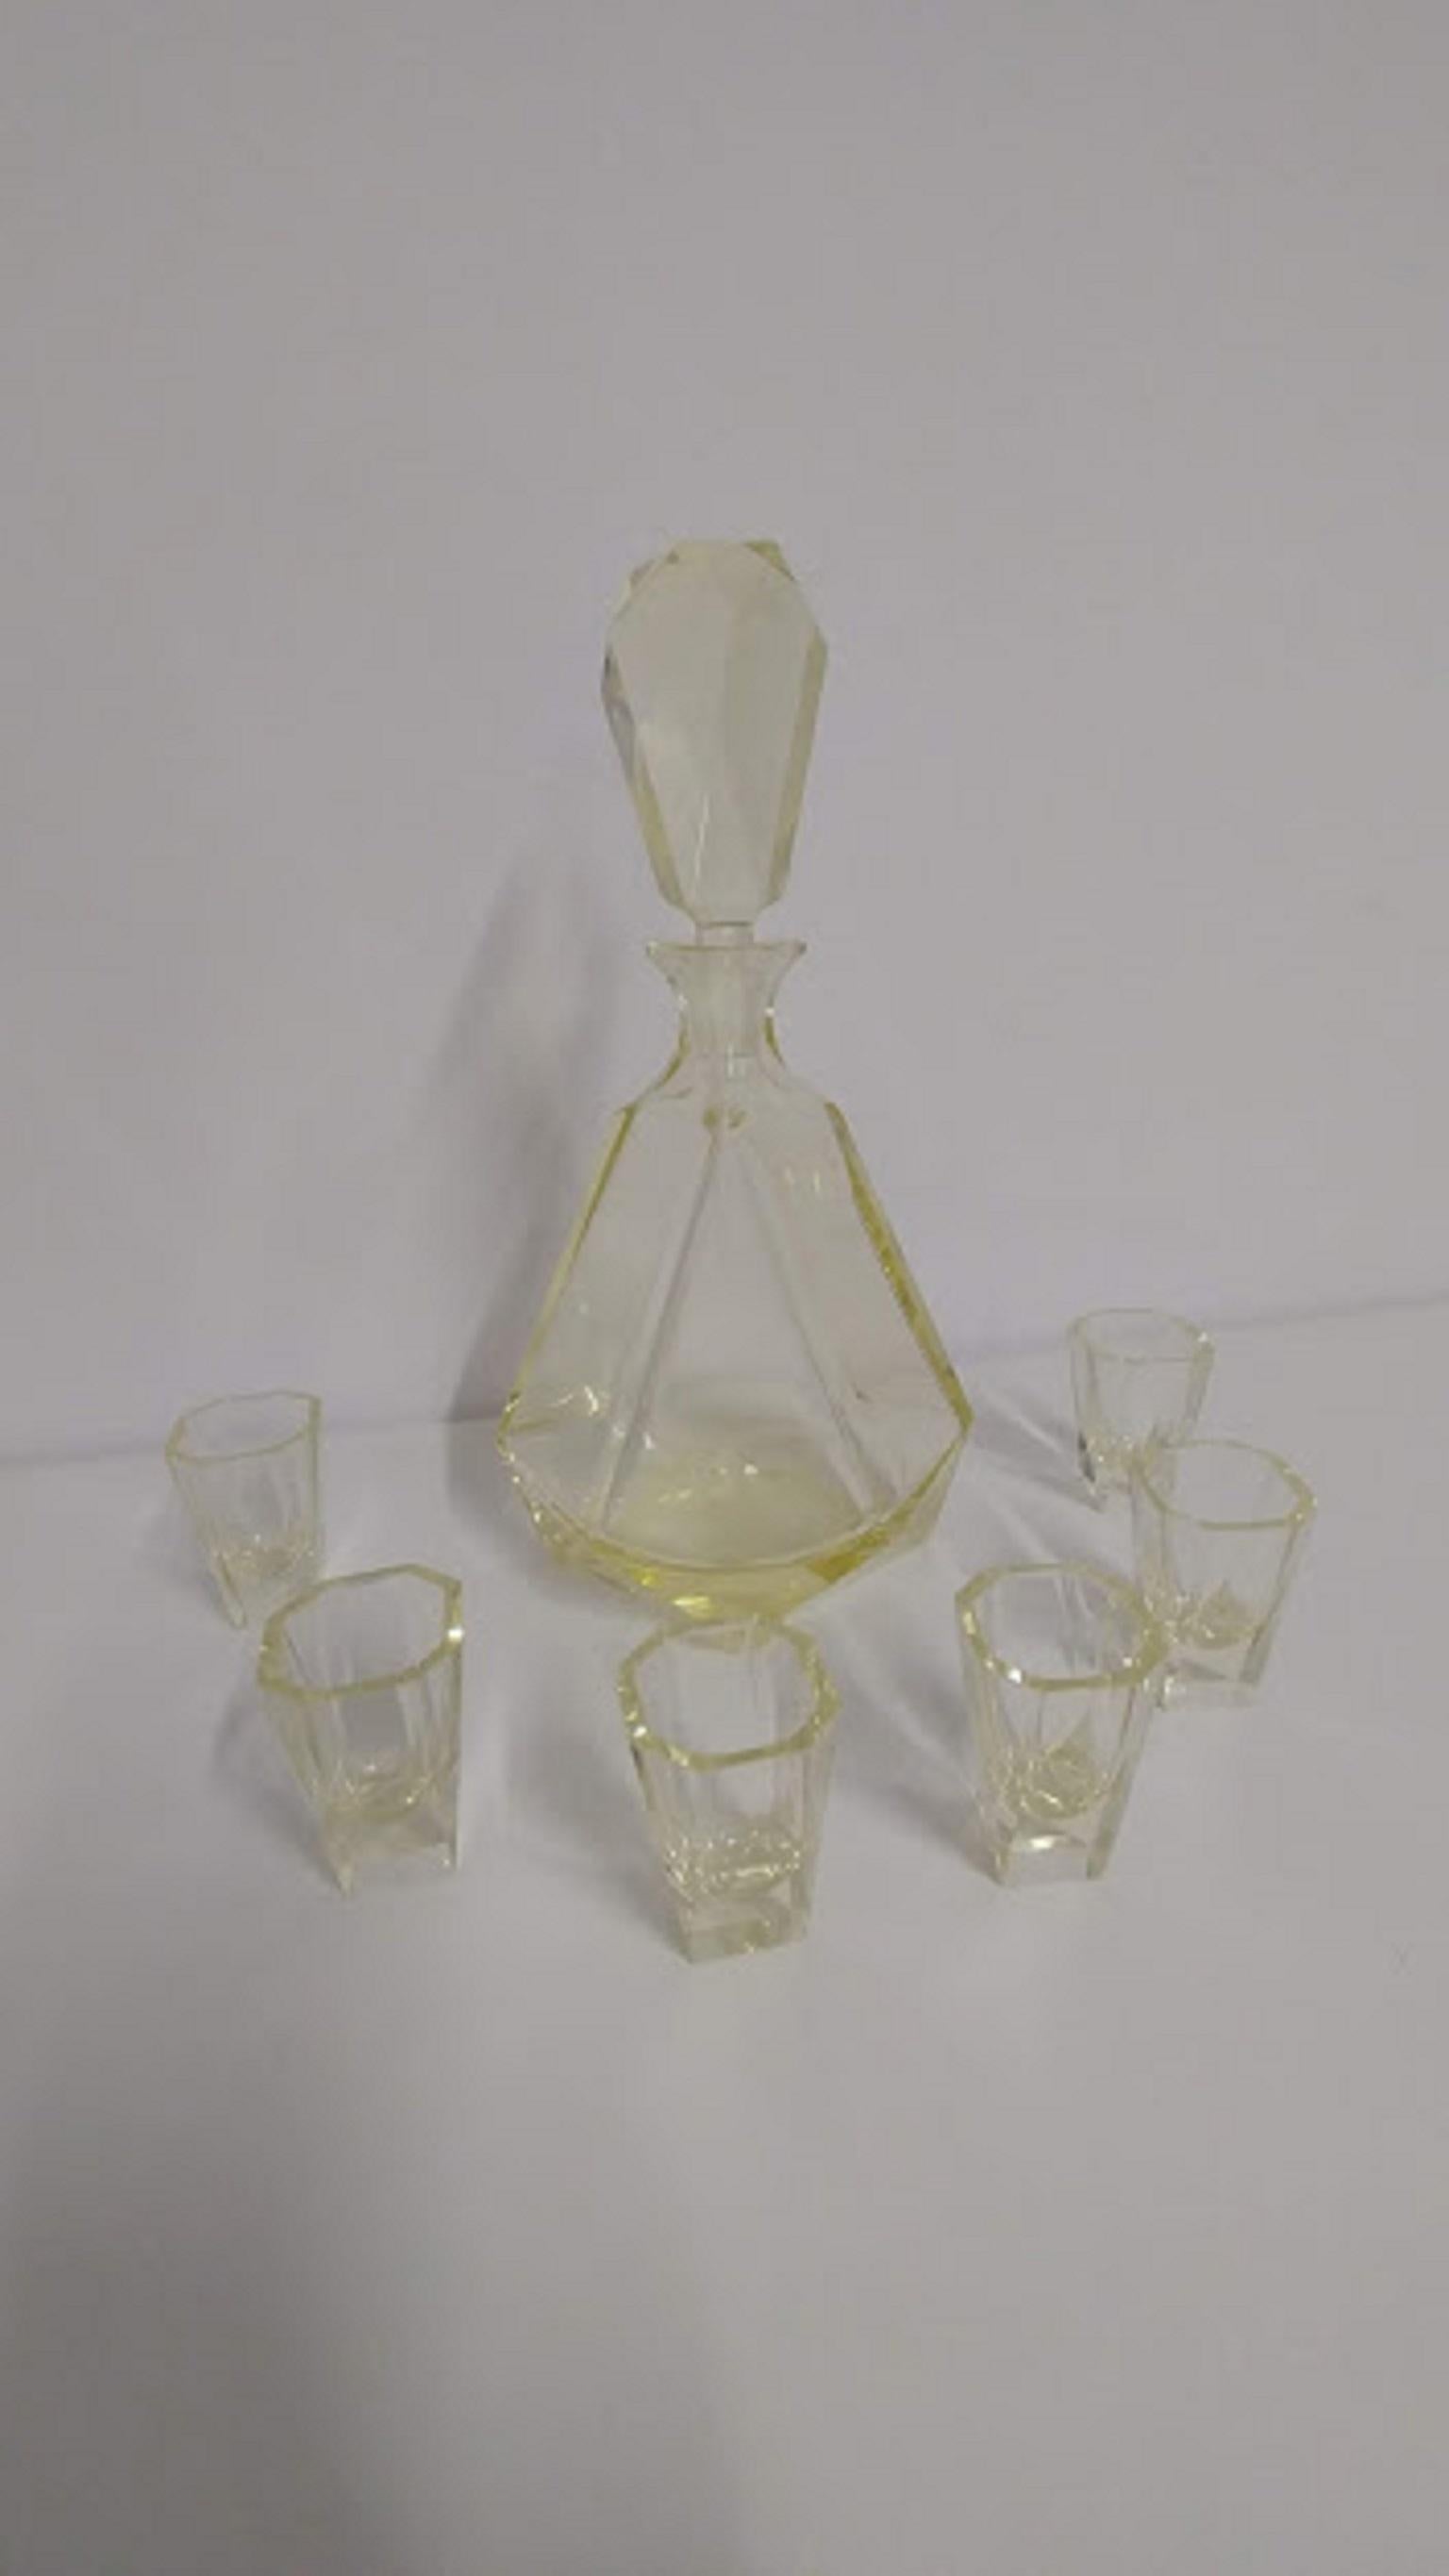 We present very good condition, elegant and functional Art Deco set decanter and 6 glasses.
Highly recommended item will be perfect complementation of the rooms in not only Classic style, but also Art Deco and